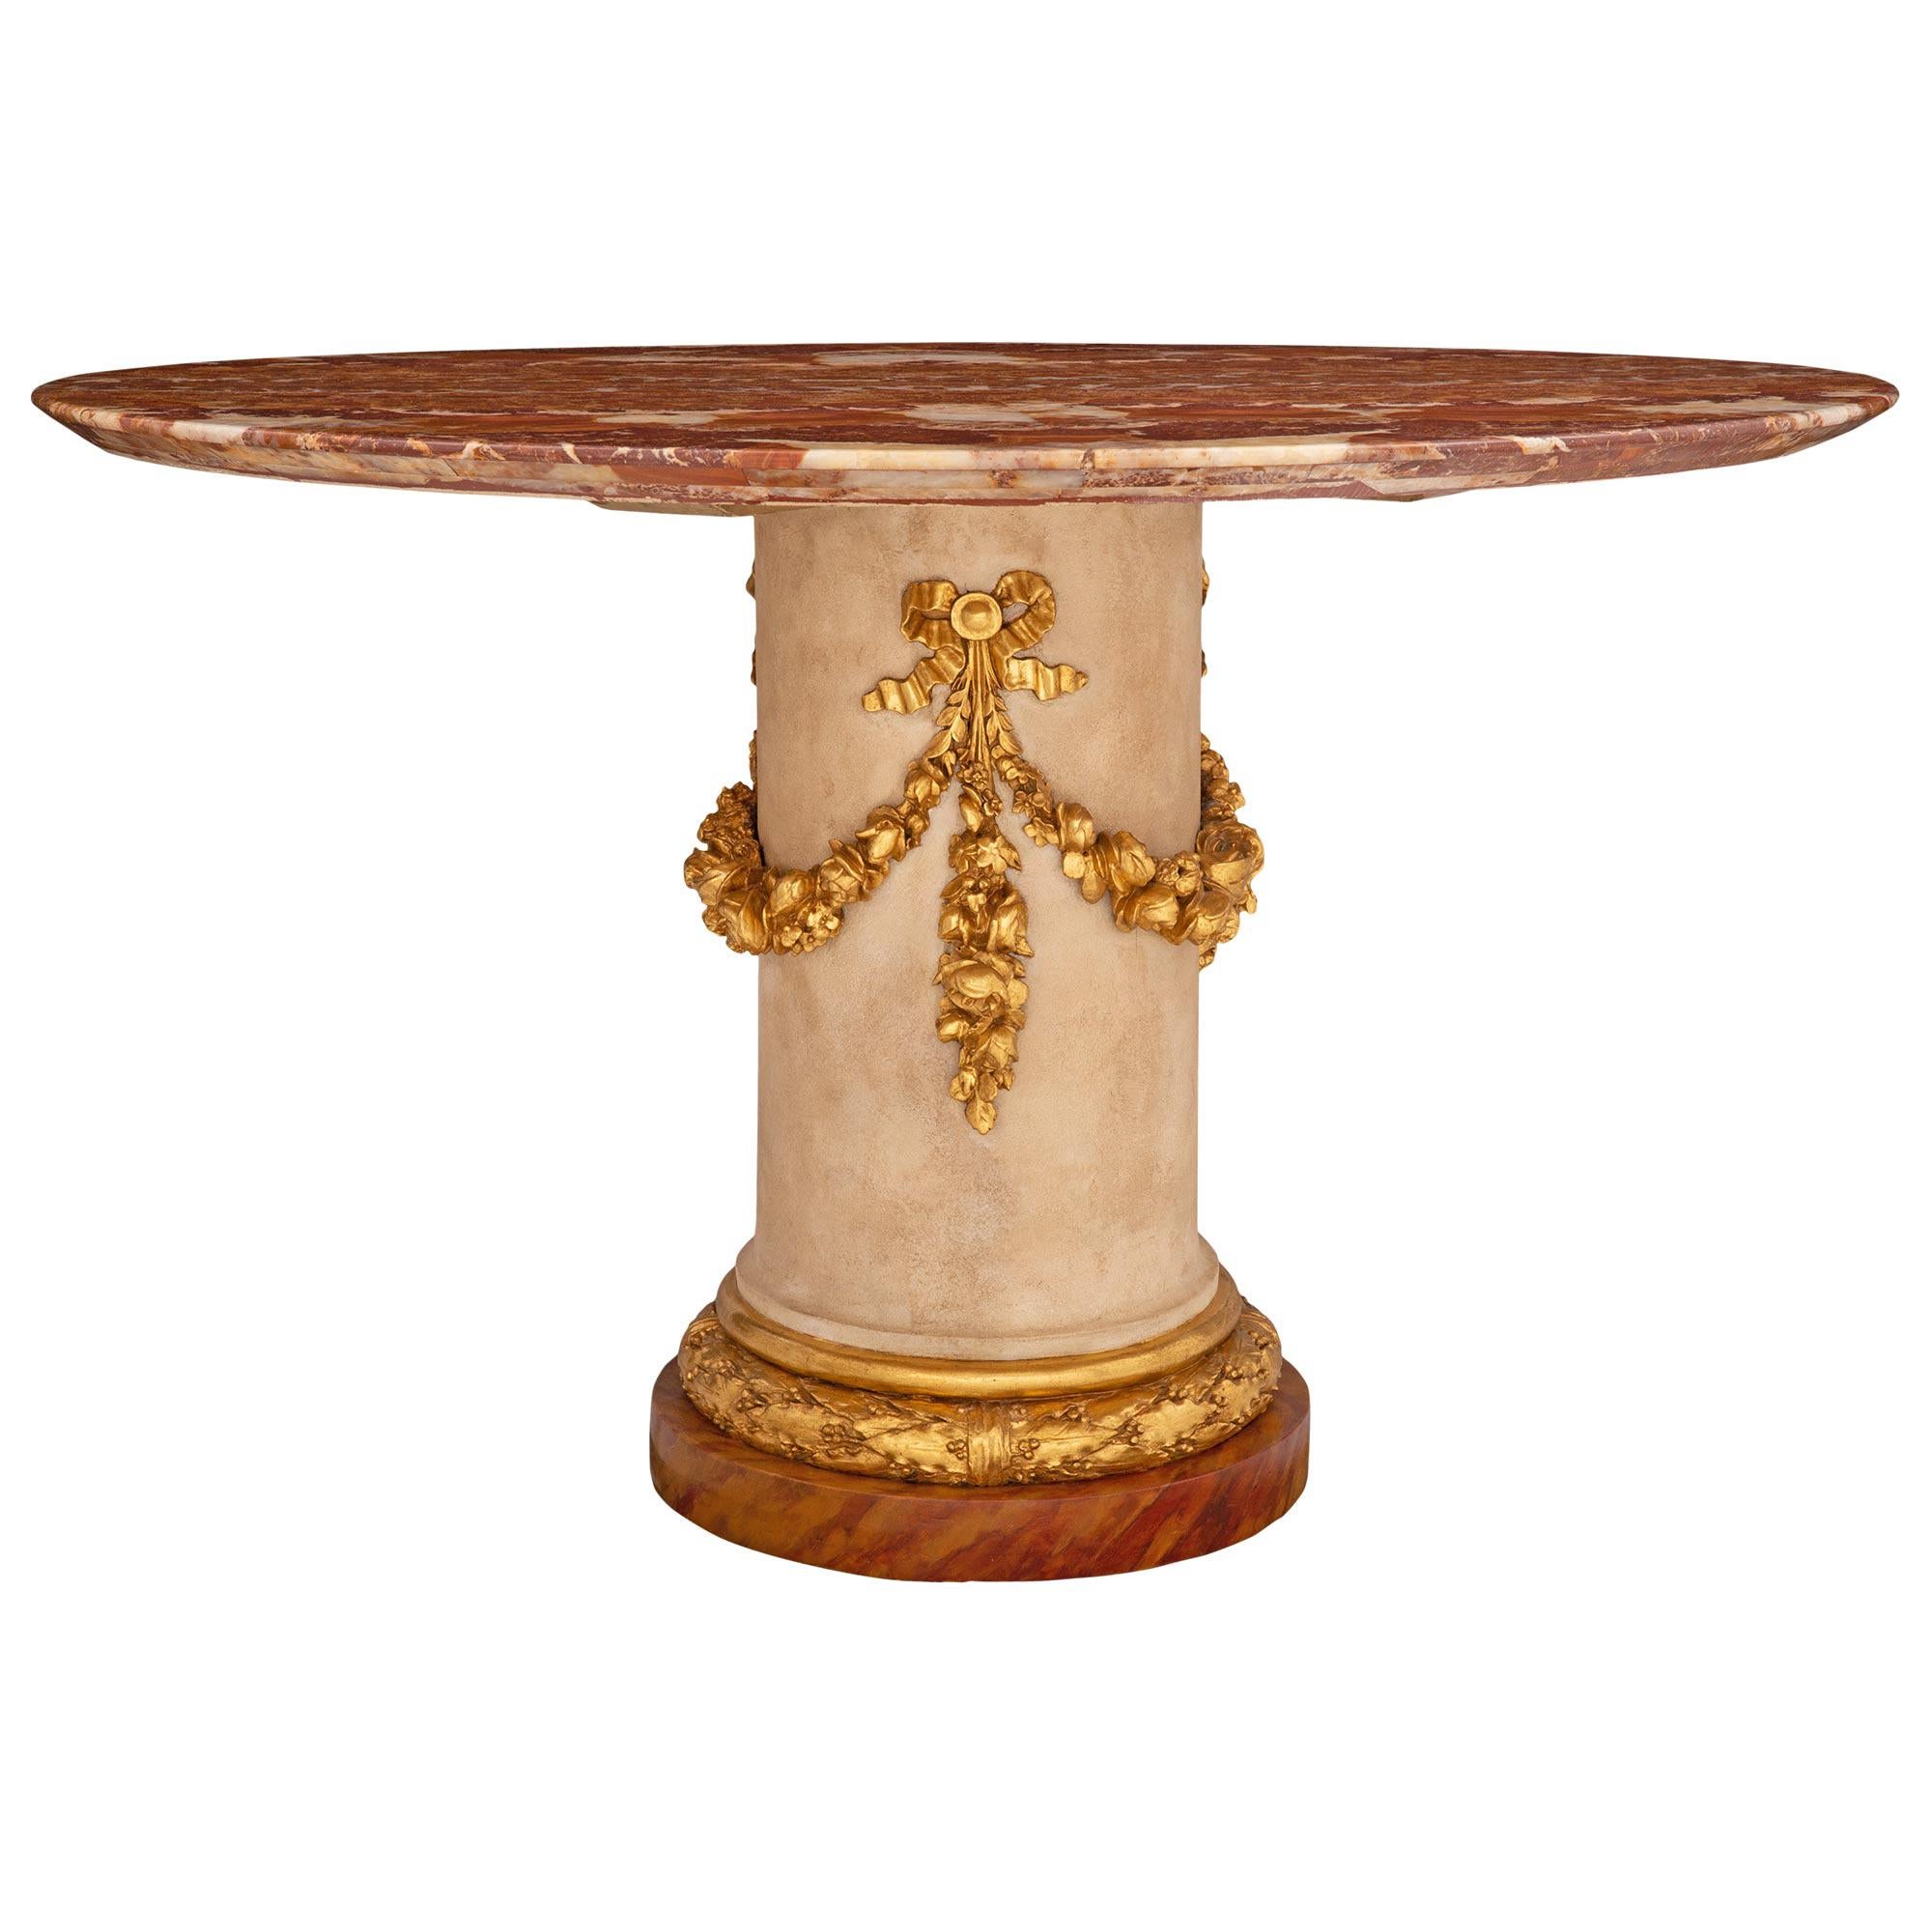 Italian 19th Century Onyx, Faux Marble, and Giltwood Center/Dining Table For Sale